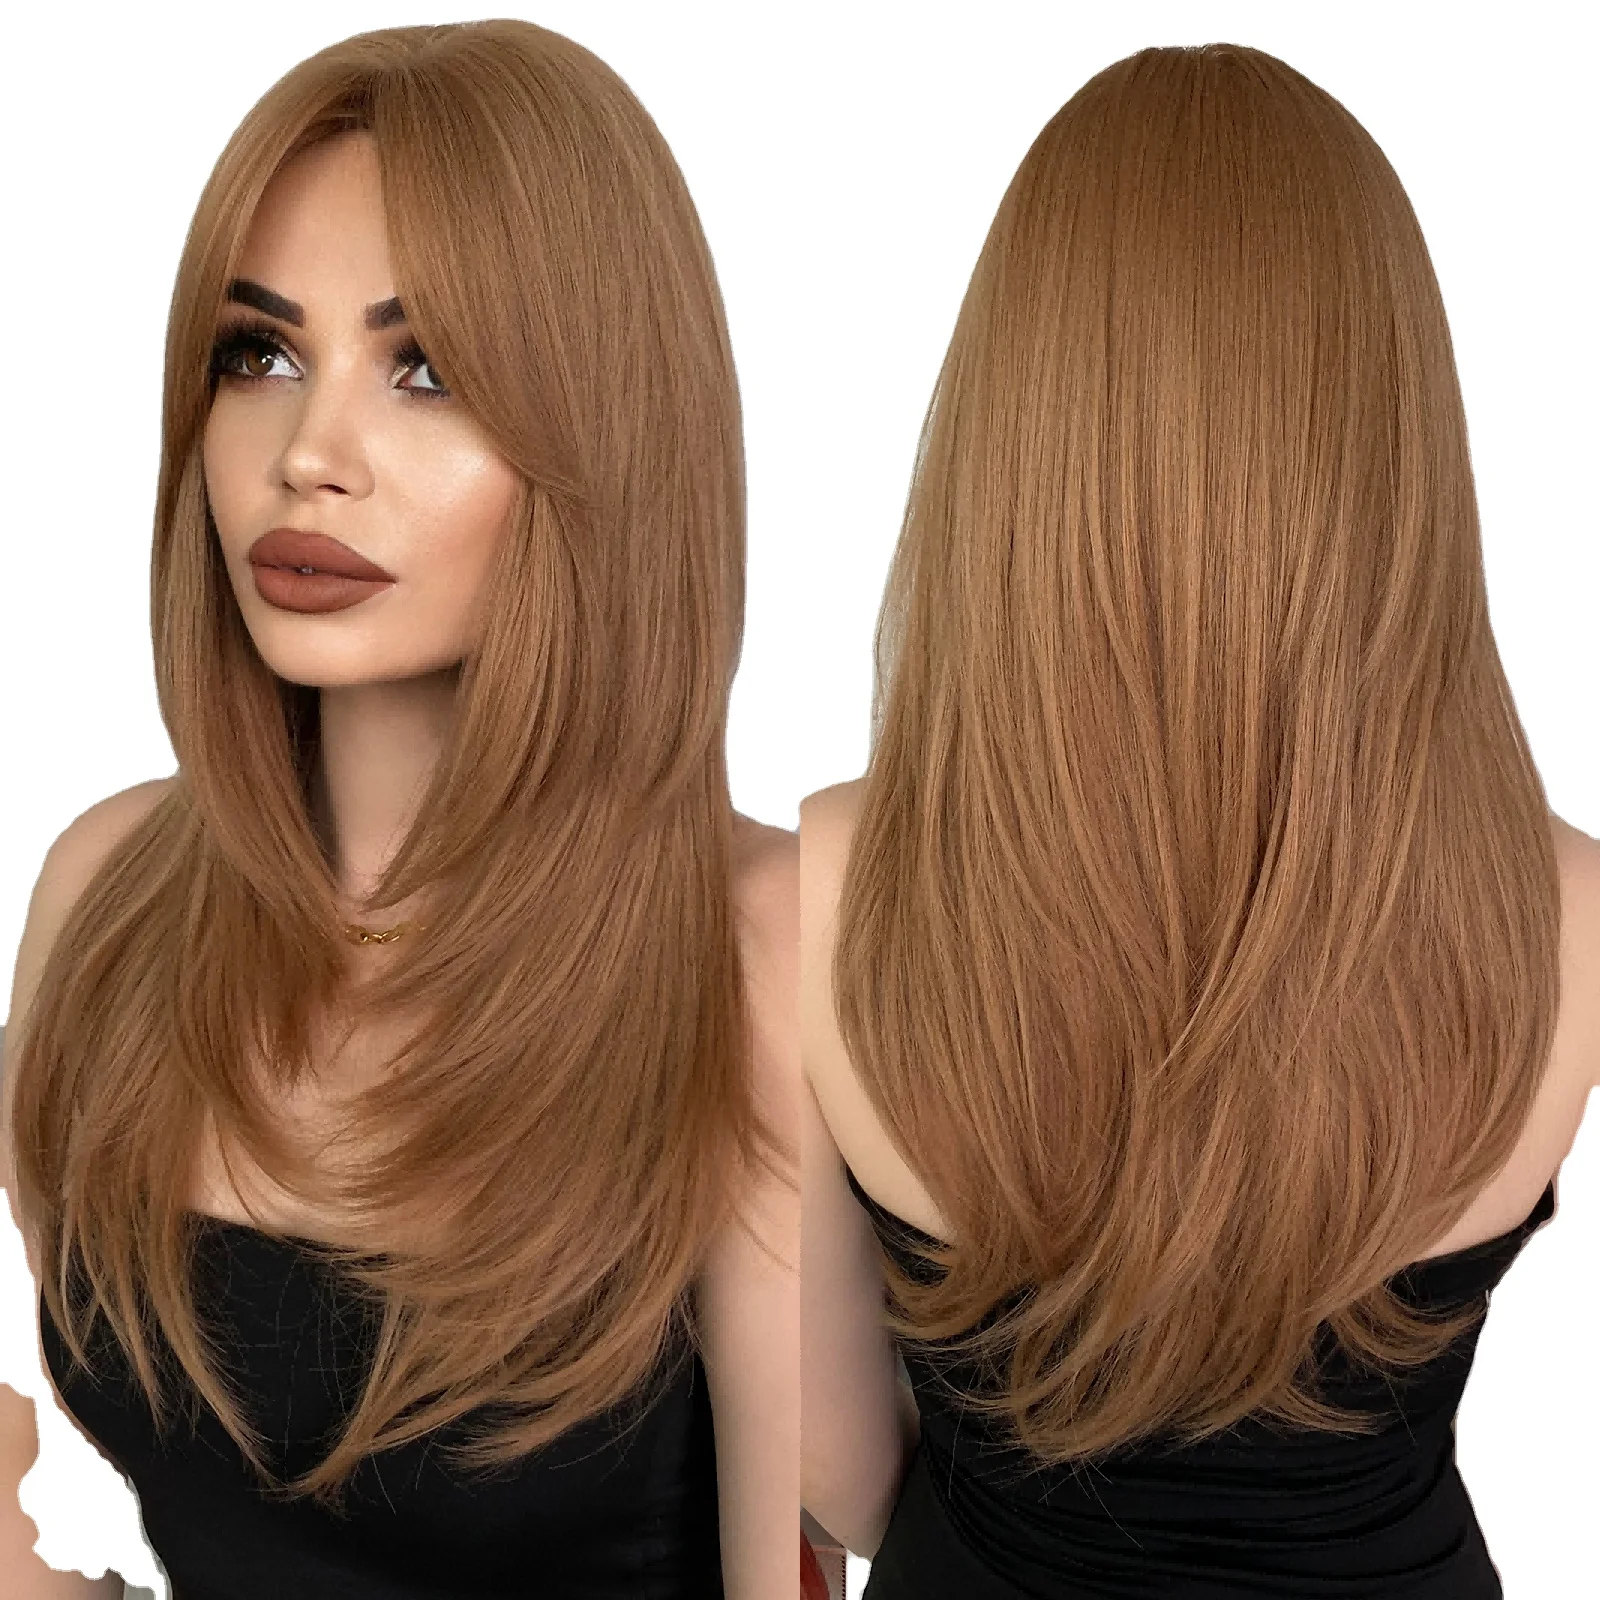 

Piruca Long Straight Wigs with Curtain Bangsstrawberry Layered Blonde Wig for Women Synthetic High Density Heat Resistant Hair